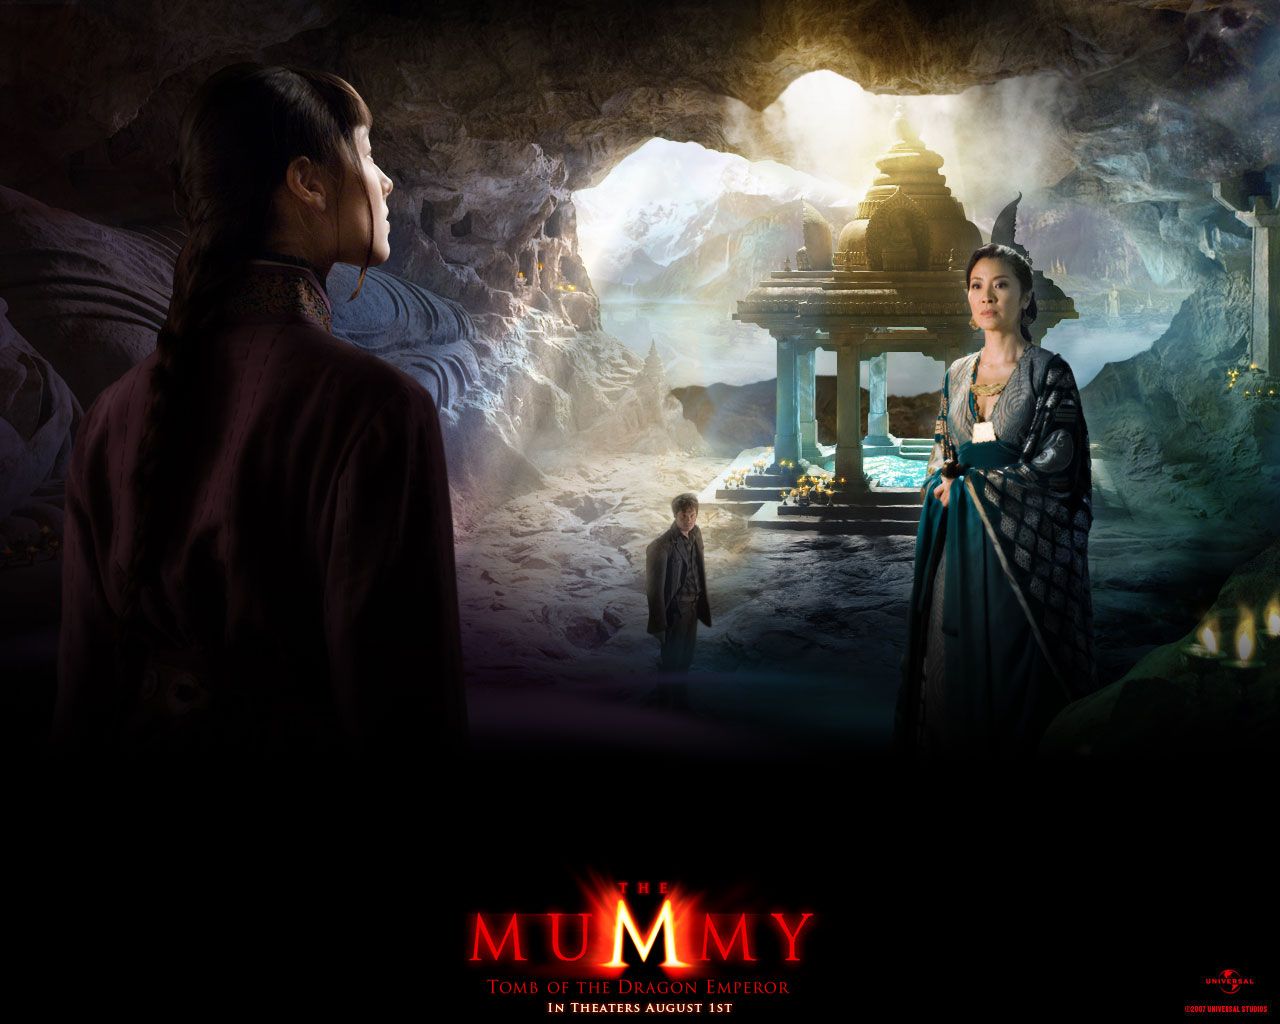 Photos The Mummy The Mummy: Tomb of the Dragon Emperor Movies